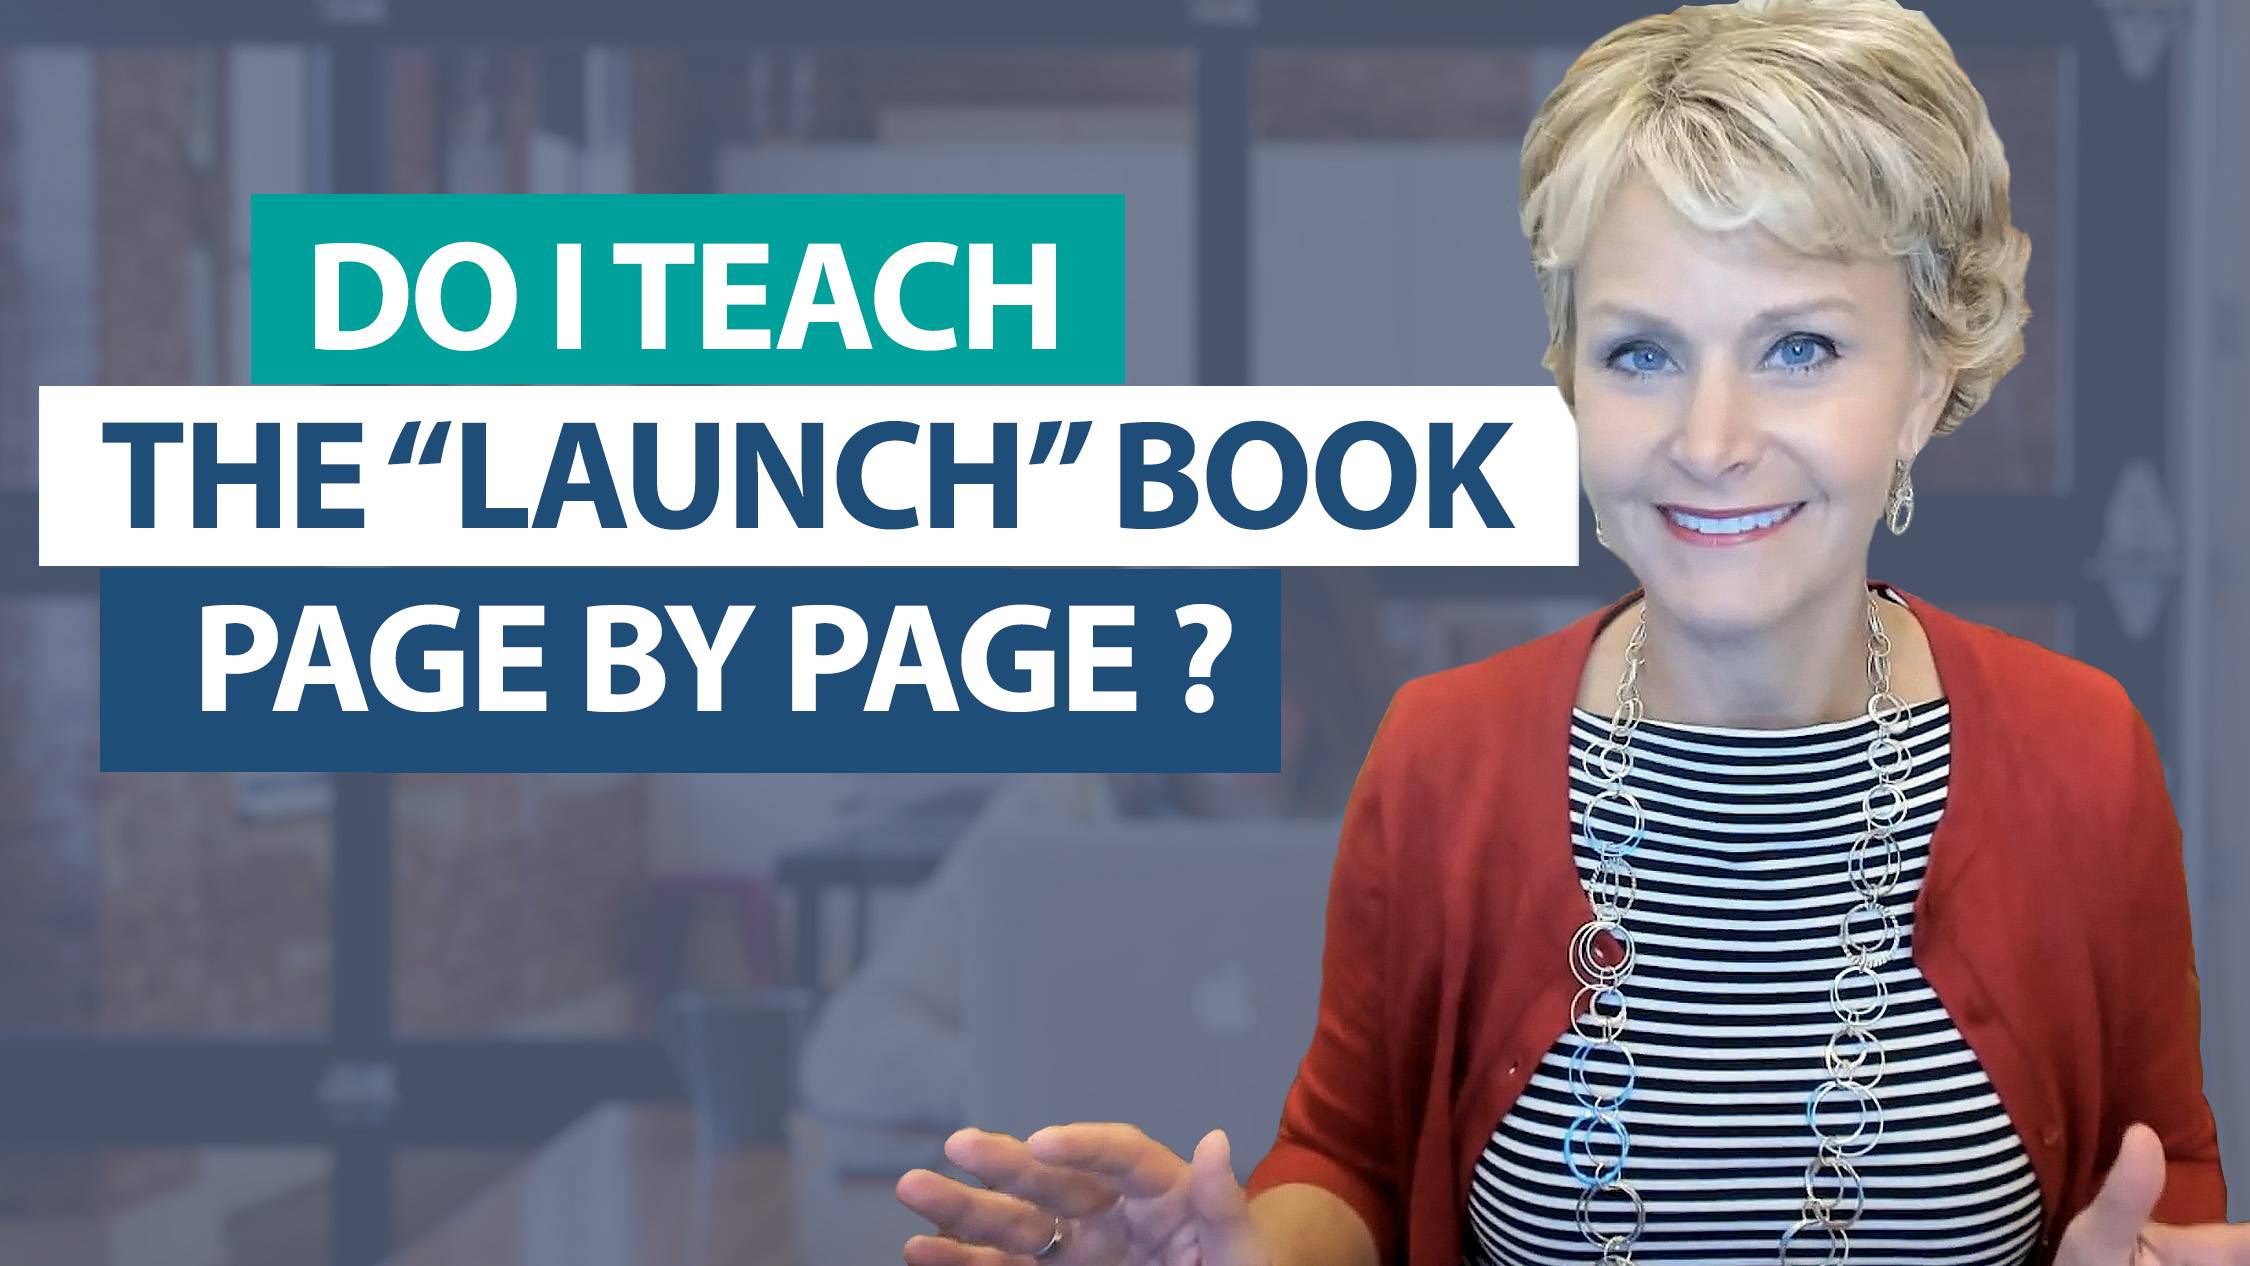 Ask Smekens: Do I teach the Launch book page by page?